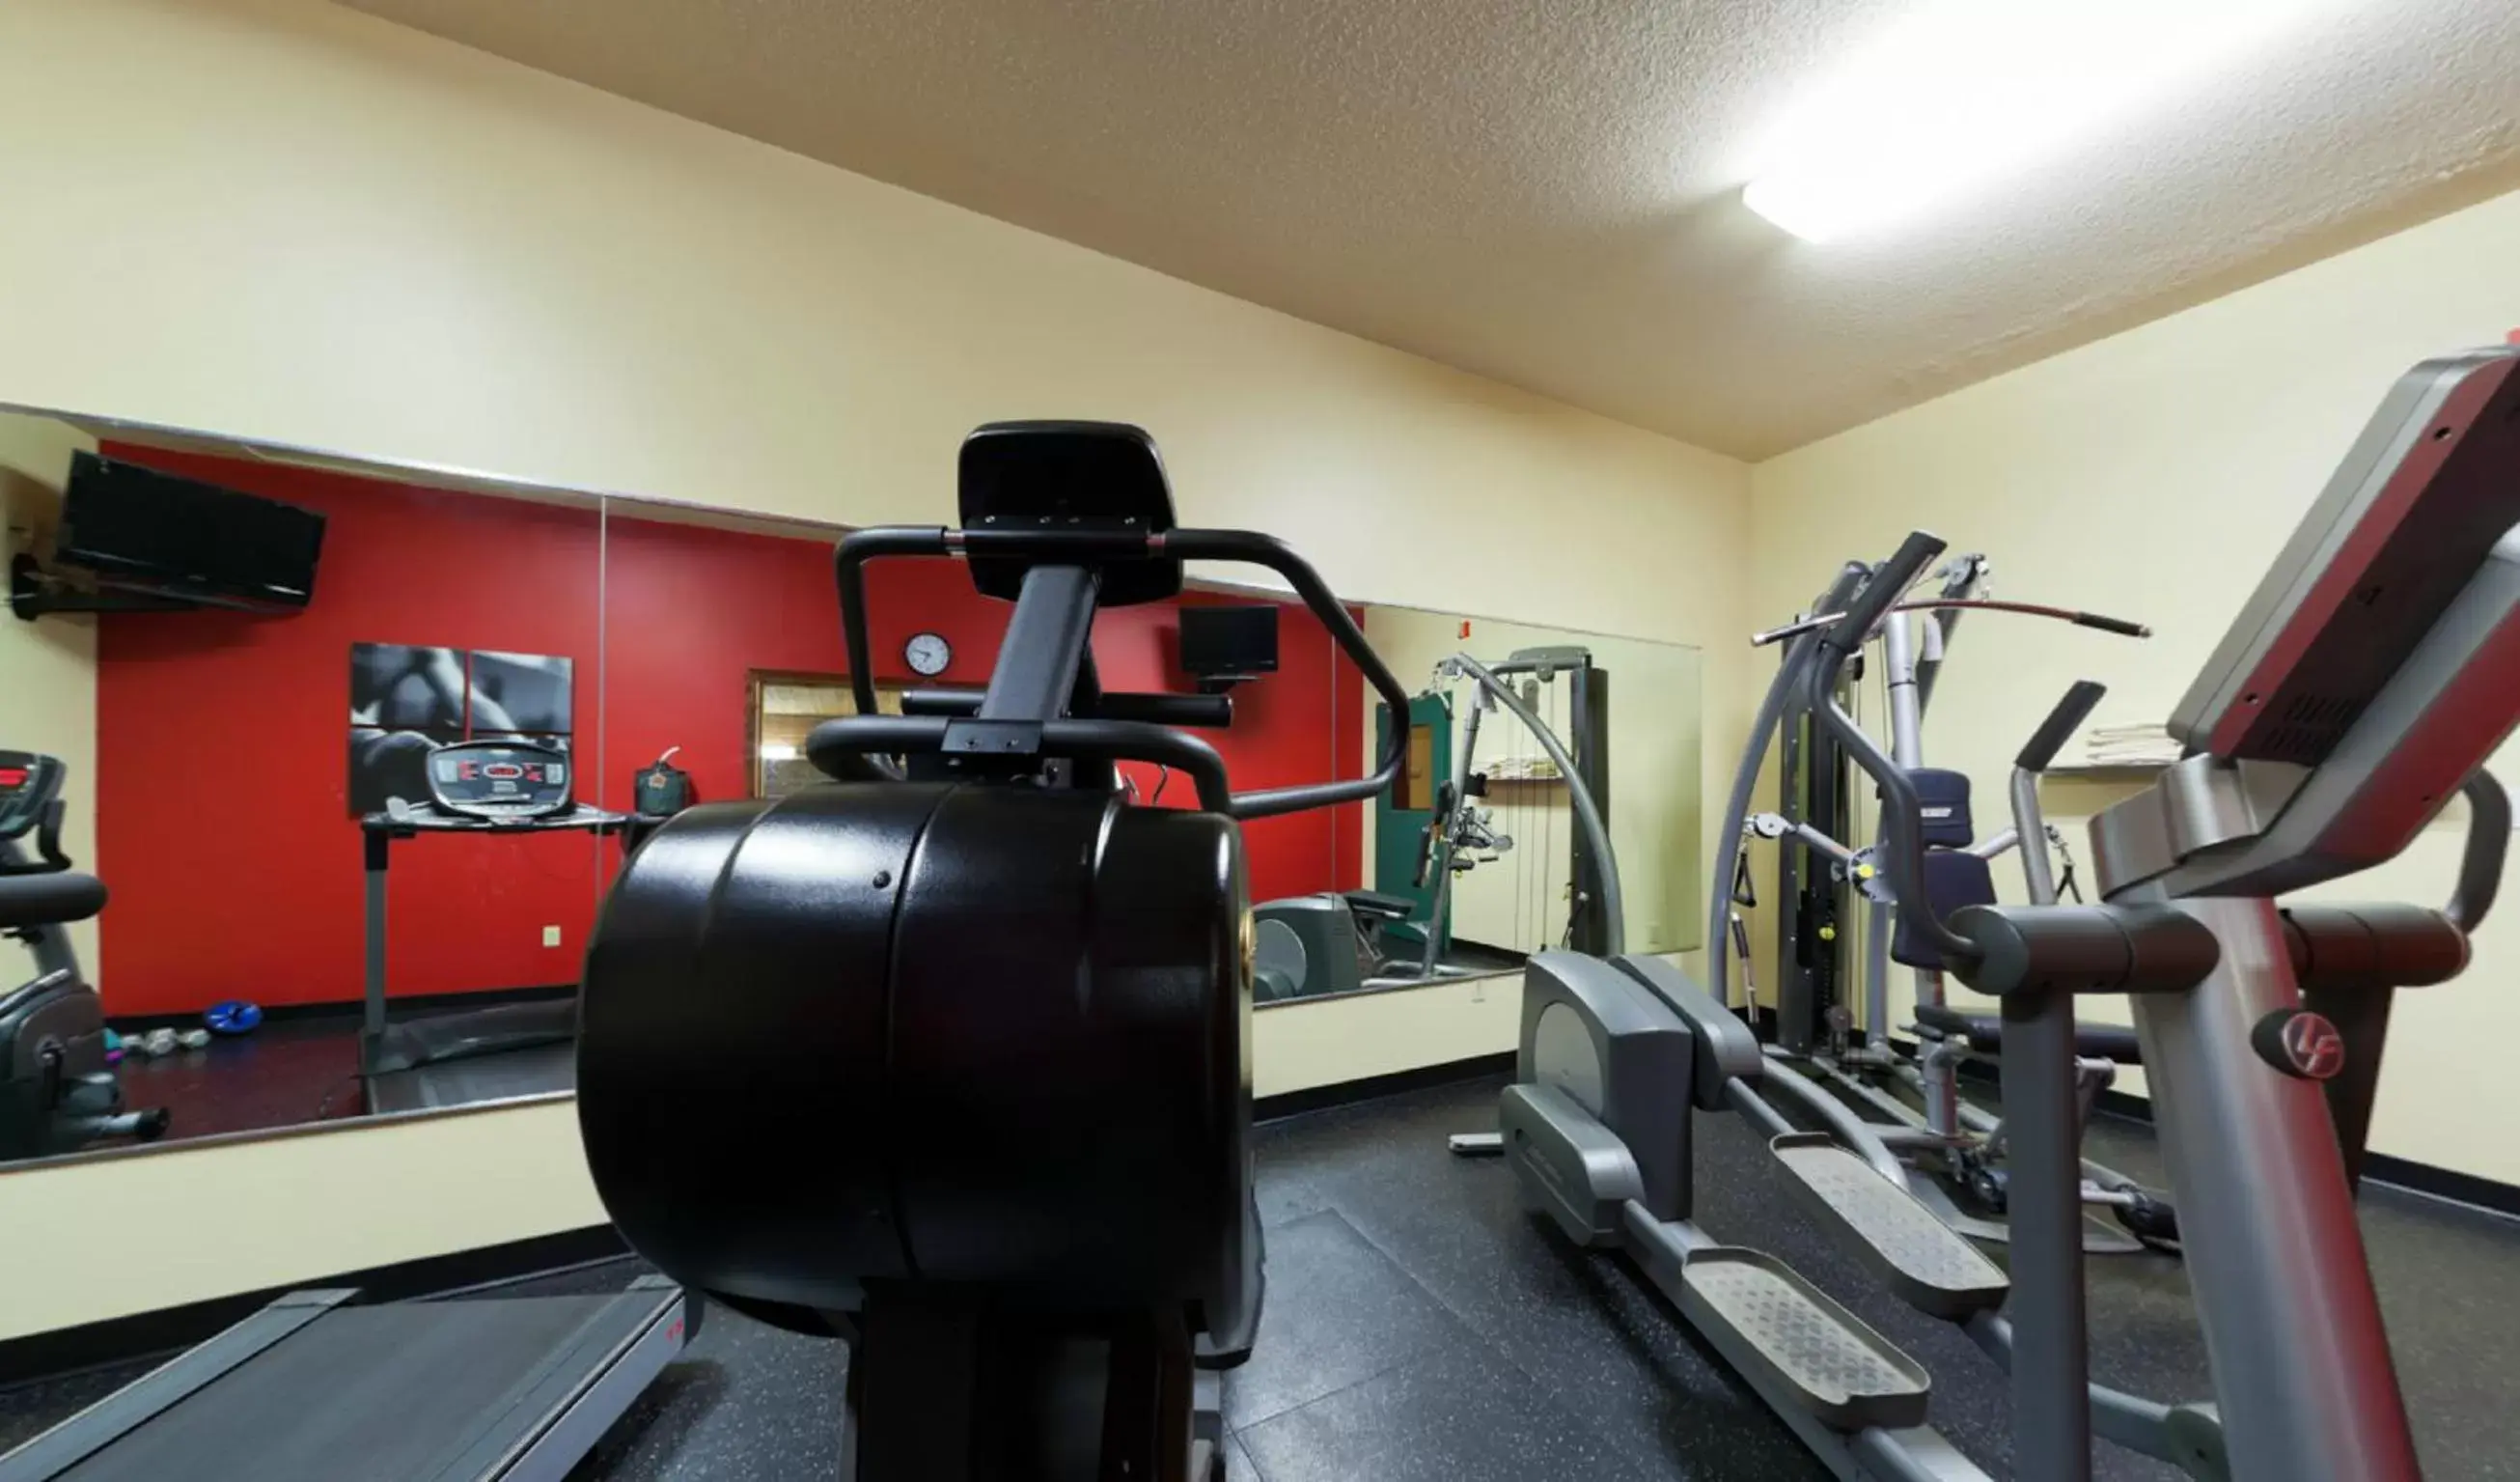 Fitness centre/facilities, Fitness Center/Facilities in Country Inn & Suites by Radisson, Kearney, NE